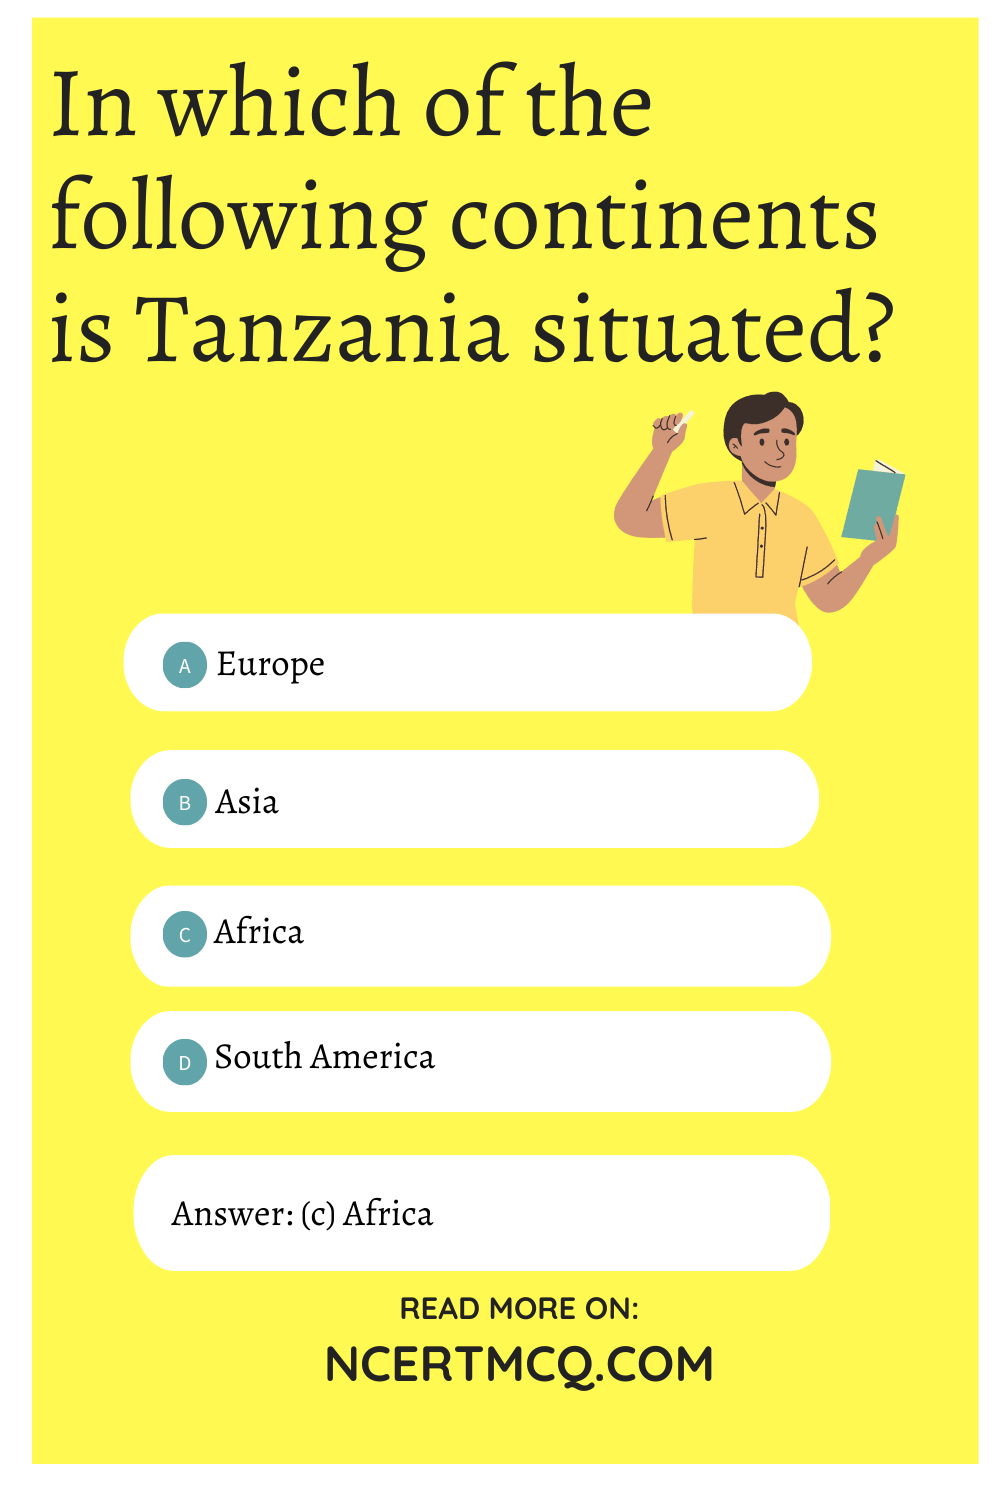 In which of the following continents is Tanzania situated?